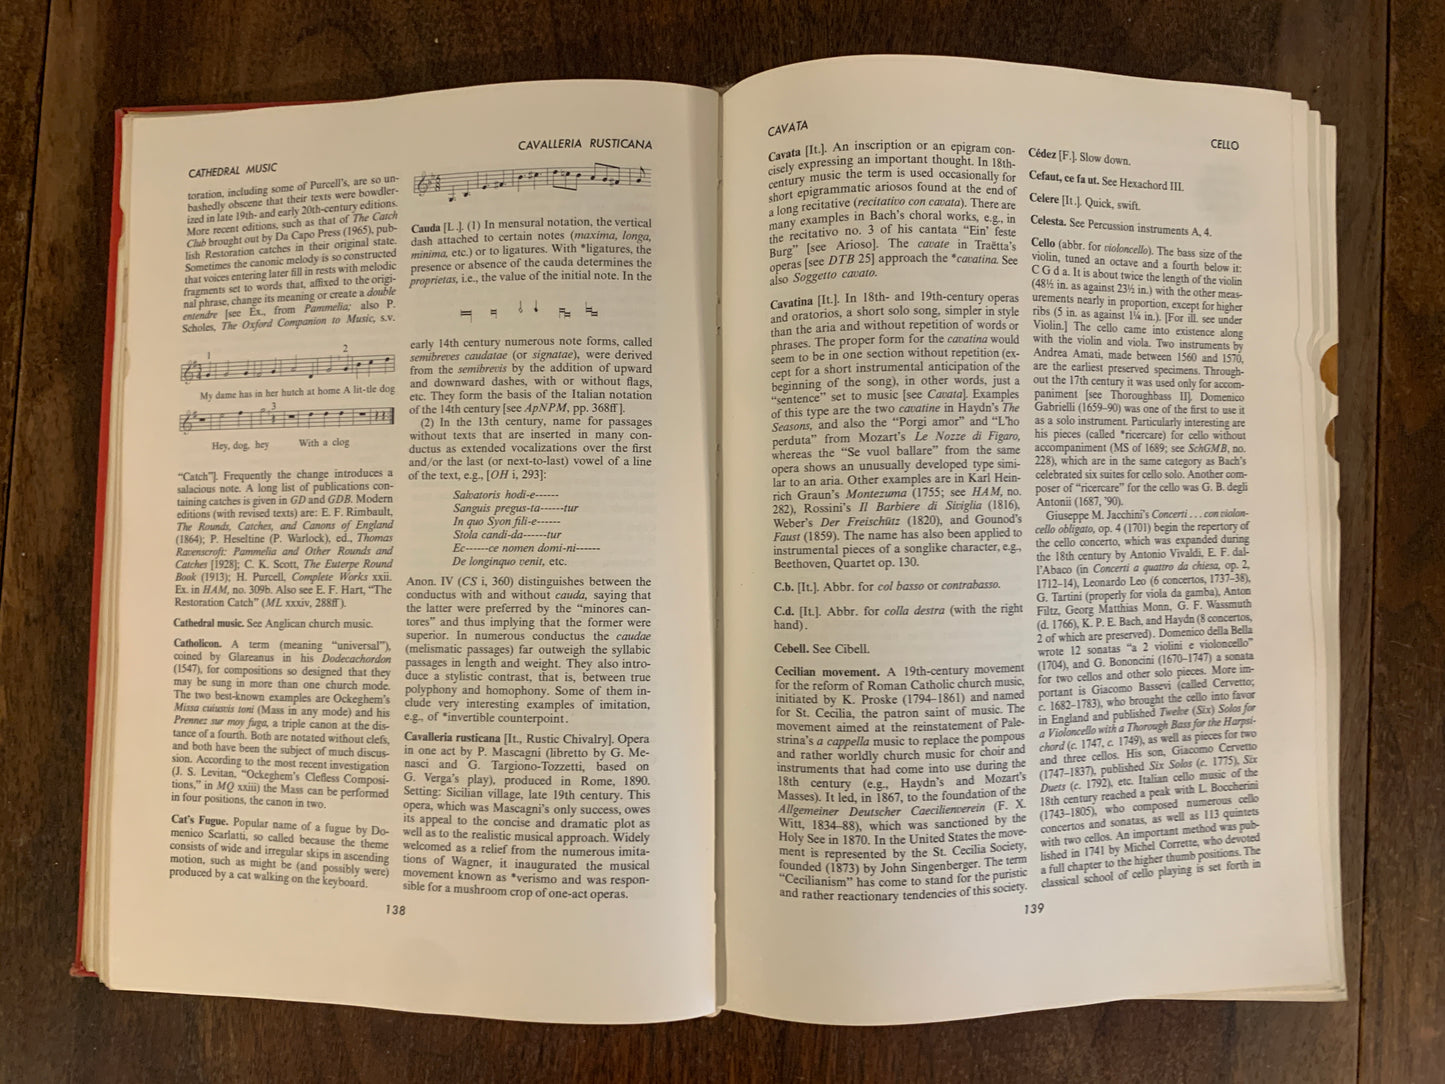 Harvard Dictionary of Music Second Edition Revised and Enlarged by Willi Apel